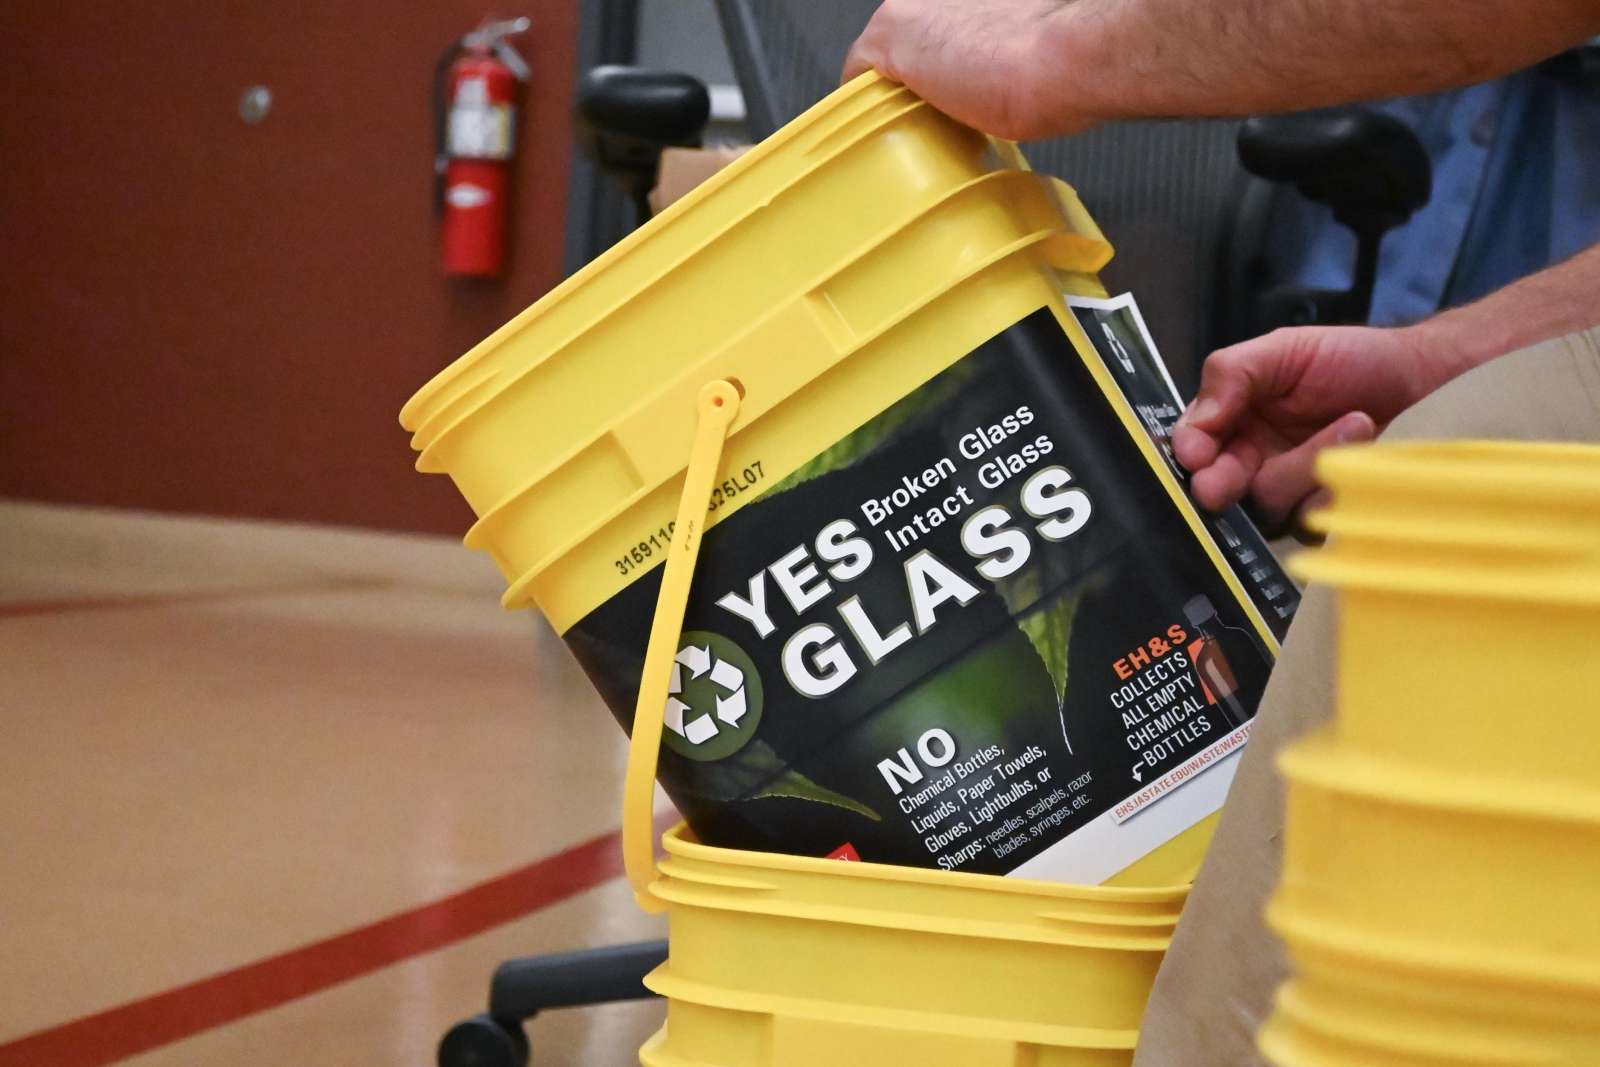 EH&S staff member places glass collection label on a donated Tidy Cats litter bucket.